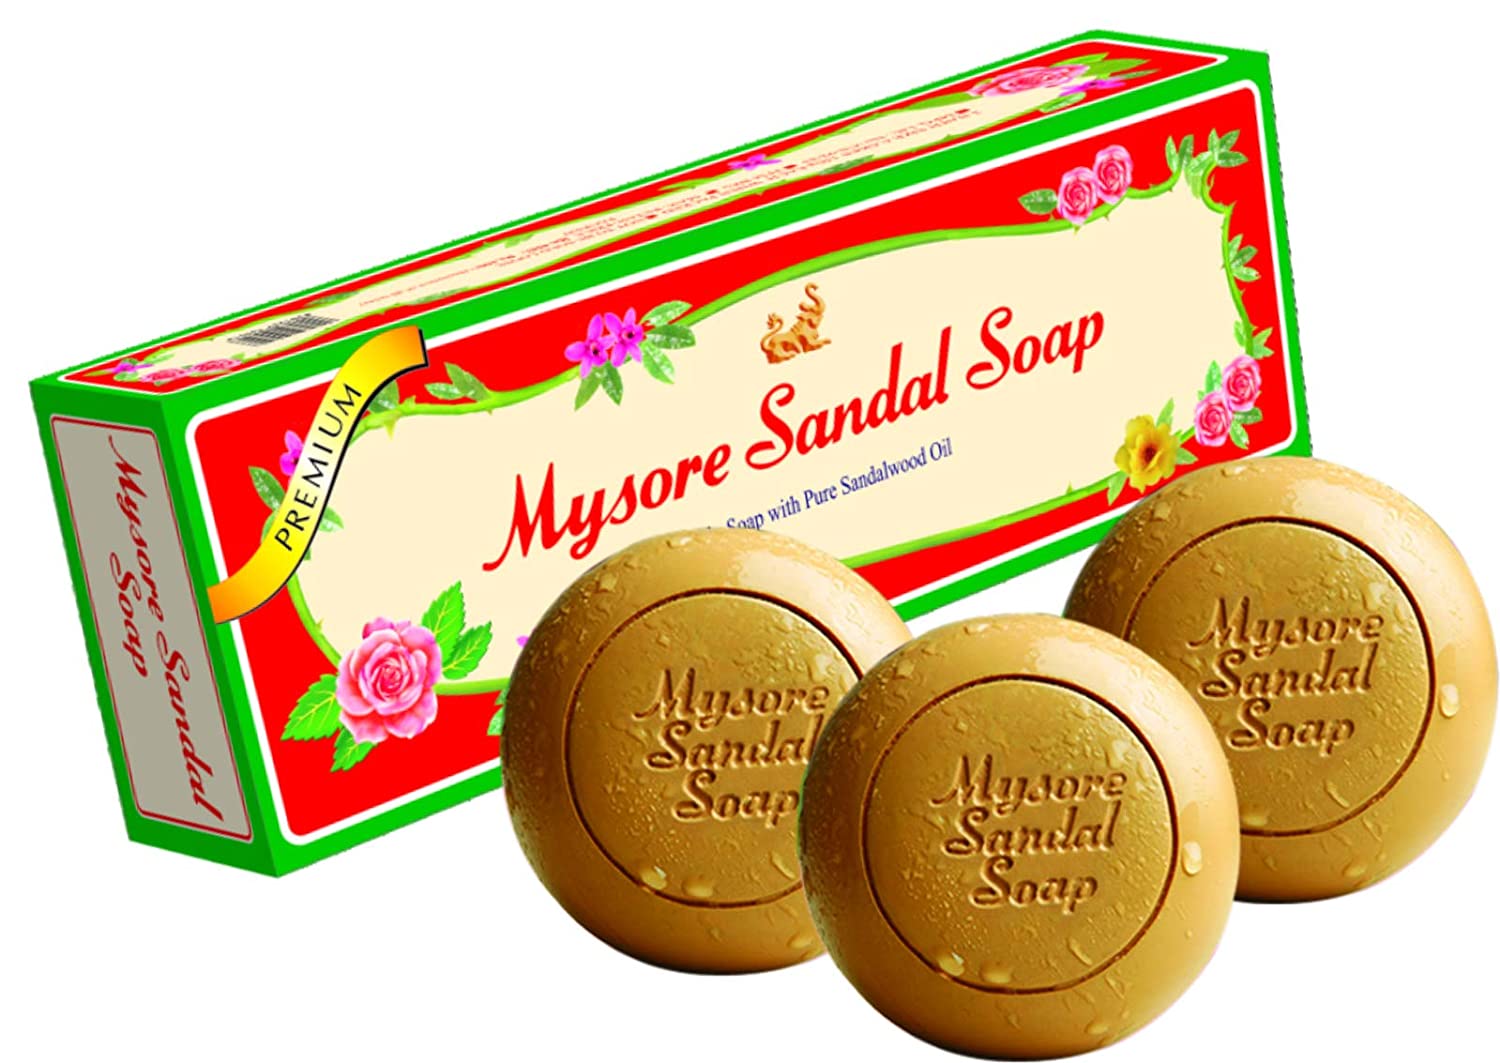 Mysore Sandal Soap | Review, Variants, Benefits, Side Effects